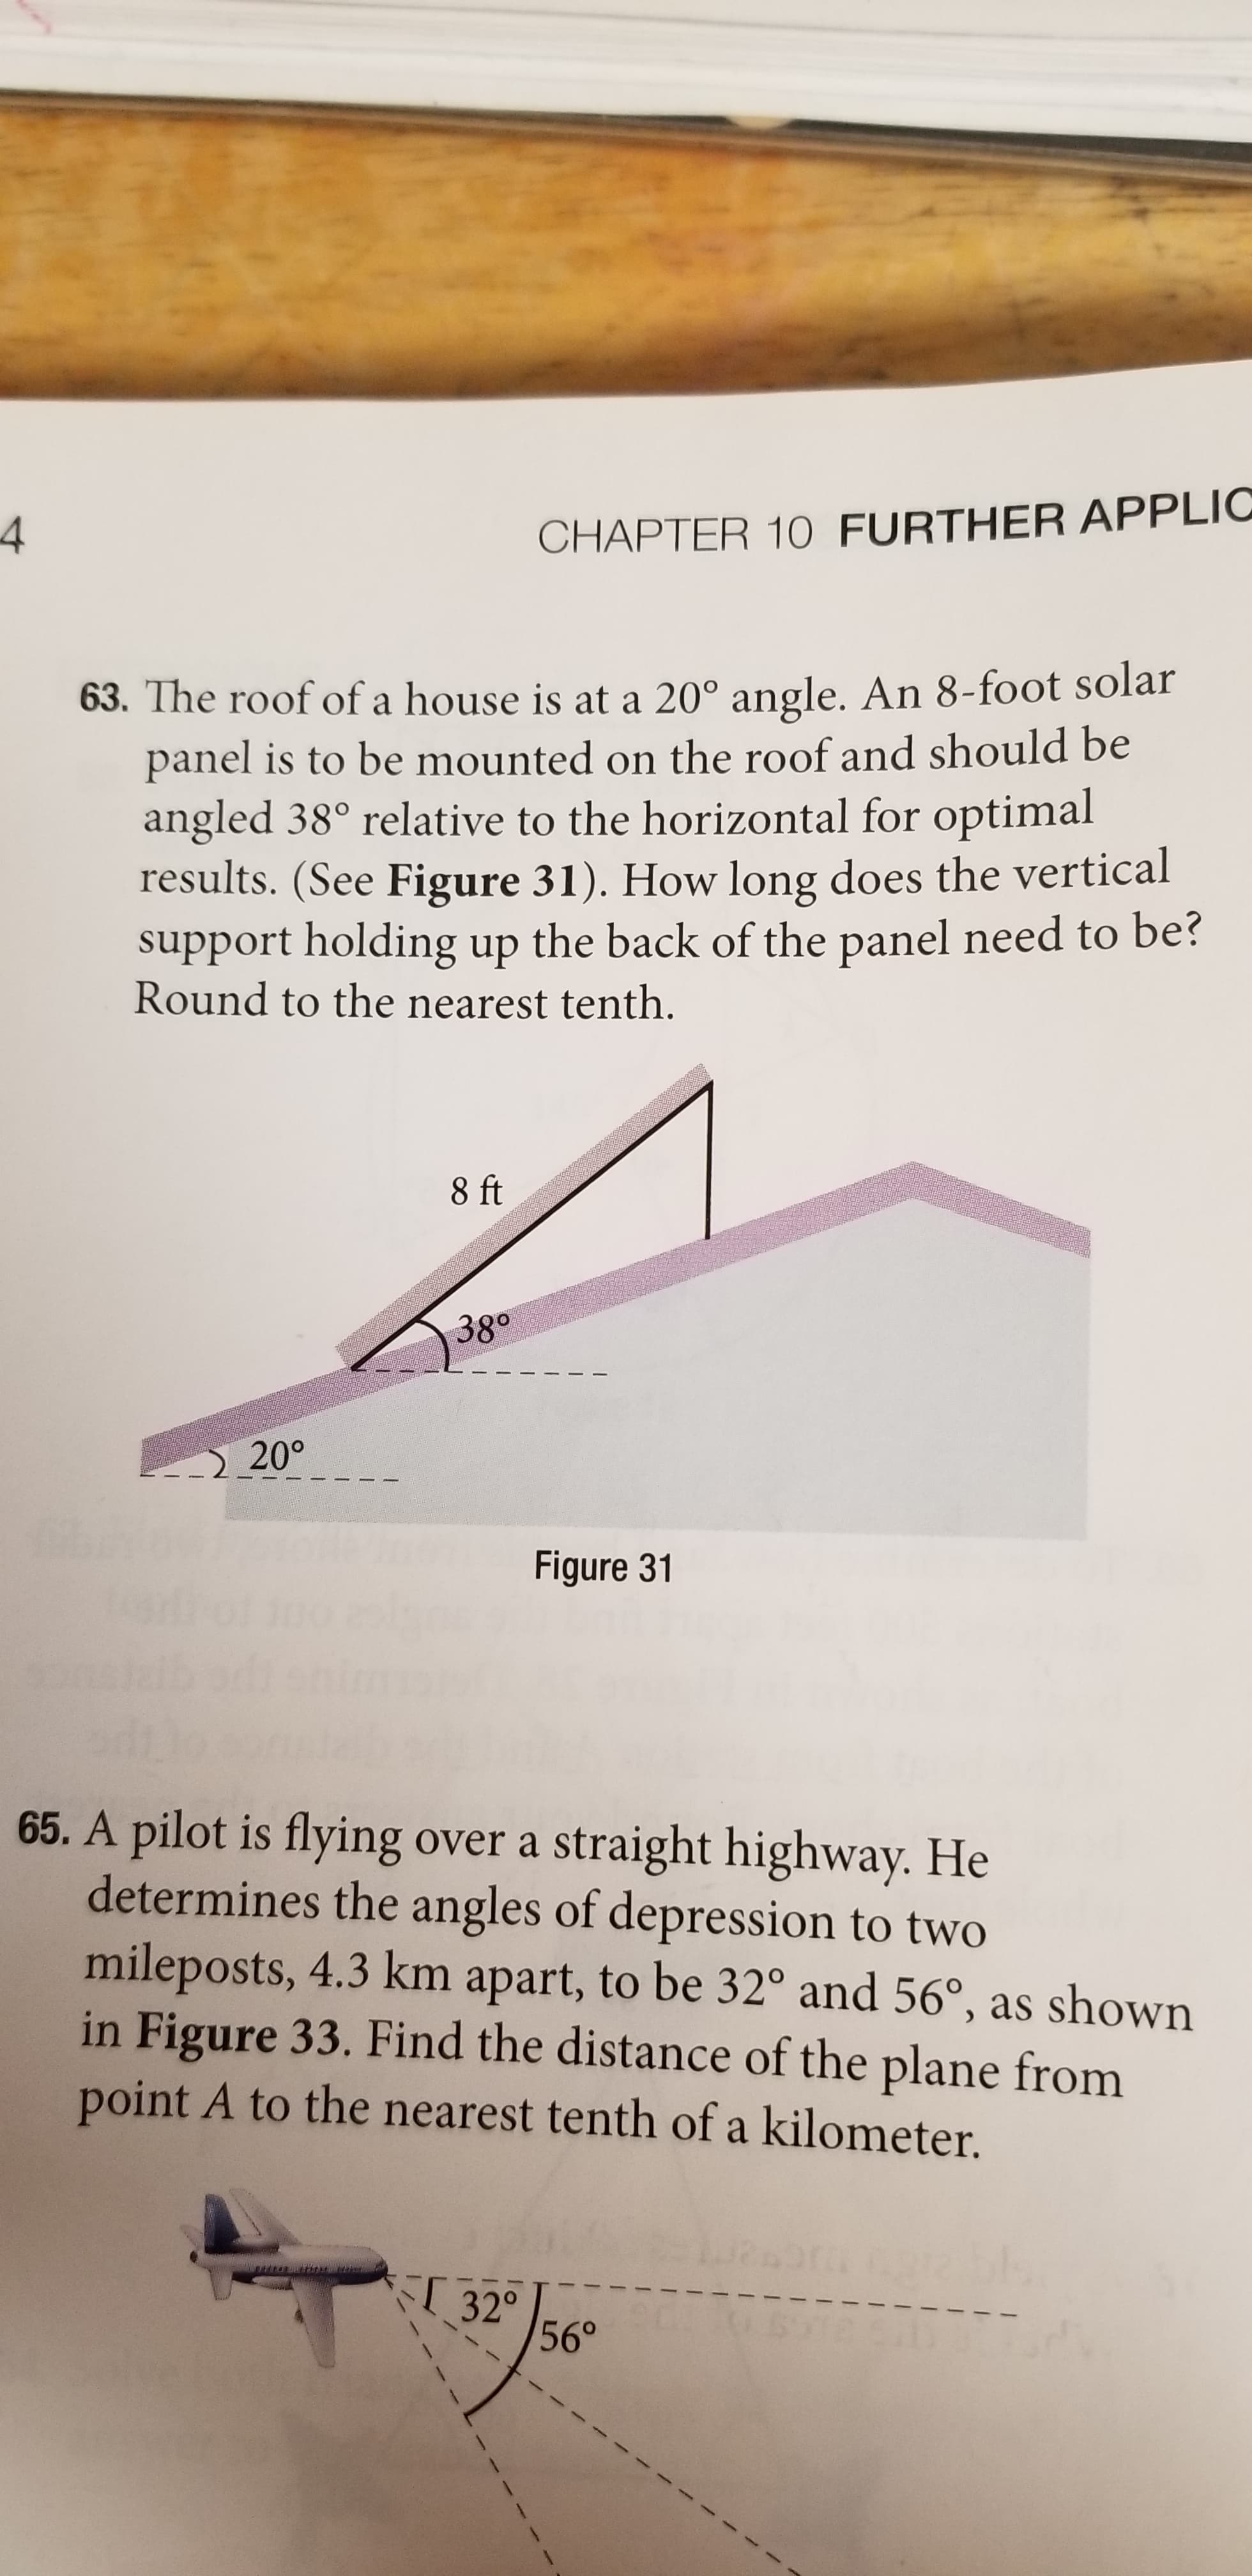 CHAPTER 10 FURTHER APPLIC
63. The roof of a house is at a 20° angle. An 8-foot solar
panel is to be mounted on the roof and should be
angled 38° relative to the horizontal for optimal
results. (See Figure 31). How long does the vertical
support holding up the back of the panel need to be?
Round to the nearest tenth.
8 ft
38°
20°
Figure 31
65. A pilot is flying over a straight highway. He
determines the angles of depression to two
mileposts, 4.3 km apart, to be 32° and 56°, as shown
in Figure 33. Find the distance of the plane from
point A to the nearest tenth of a kilometer.
32° 56°
